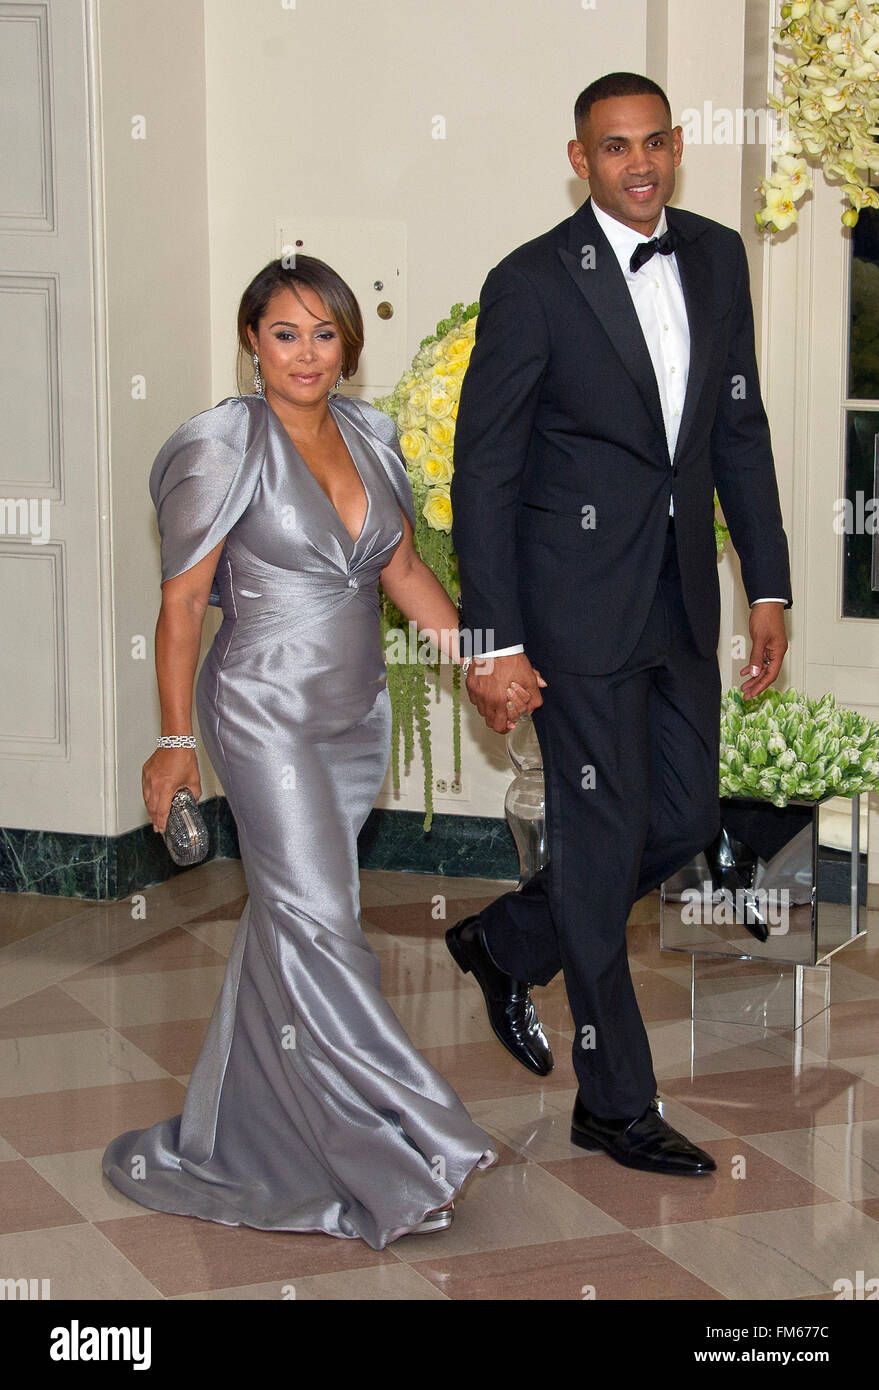 Washington DC, USA. 10th March, 2016. Grant Hill, Former Basketball Player, Member of The President·s Council on Fitness, Sports & Nutrition and Tamia Hill arrives for the State Dinner in honor of Prime Minister Trudeau and Mrs. Sophie Grégoire Trudeau of Canada at the White House in Washington, DC on Thursday, March 10, 2016. Credit:  dpa picture alliance/Alamy Live News Stock Photo